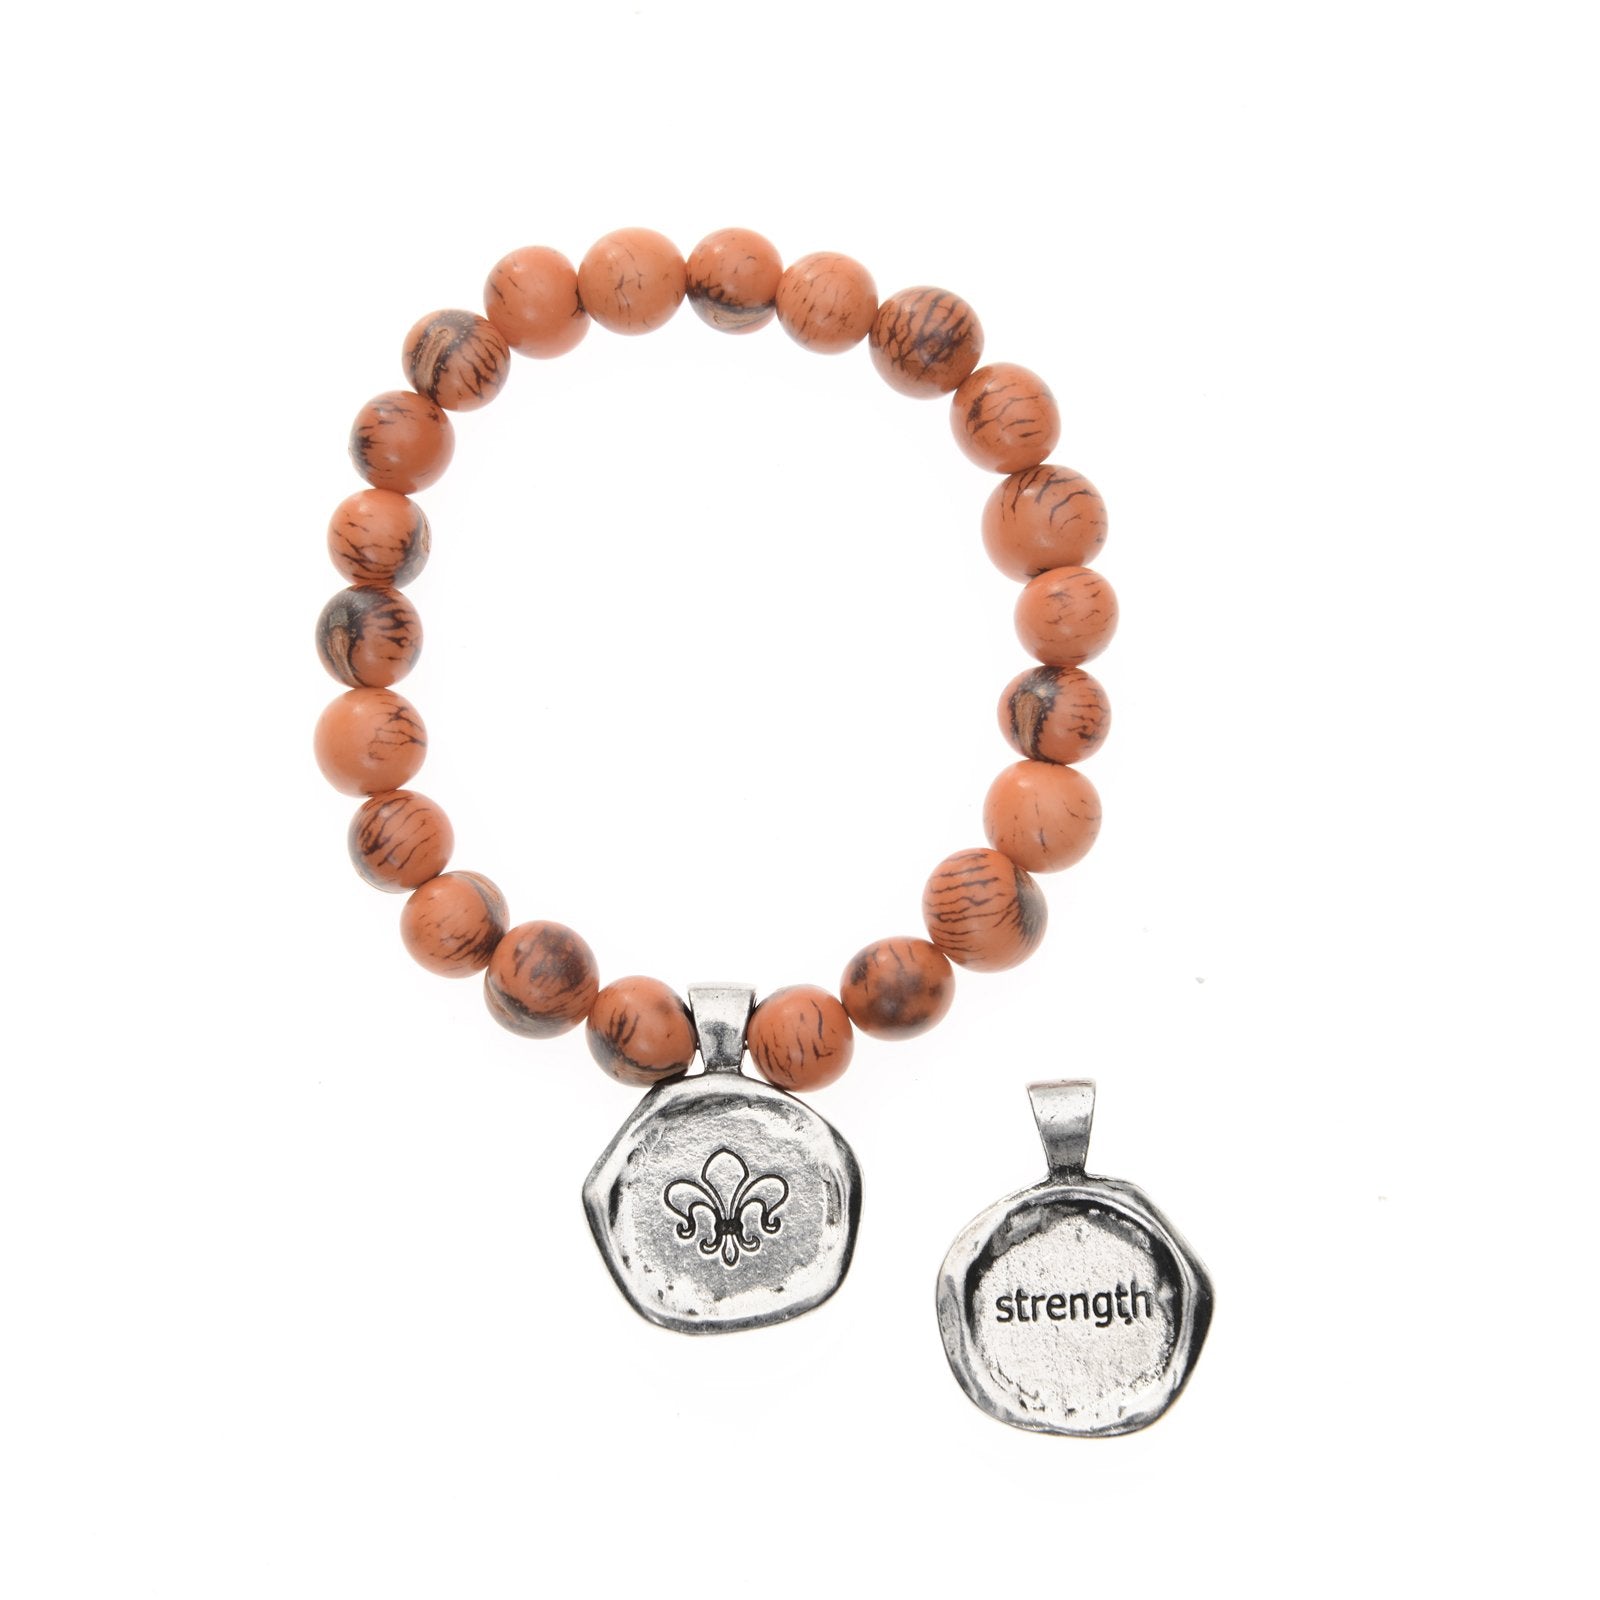 Tiger Tangerine Acai Seeds of Life Bracelet with Wax Seal - Whitney Howard Designs